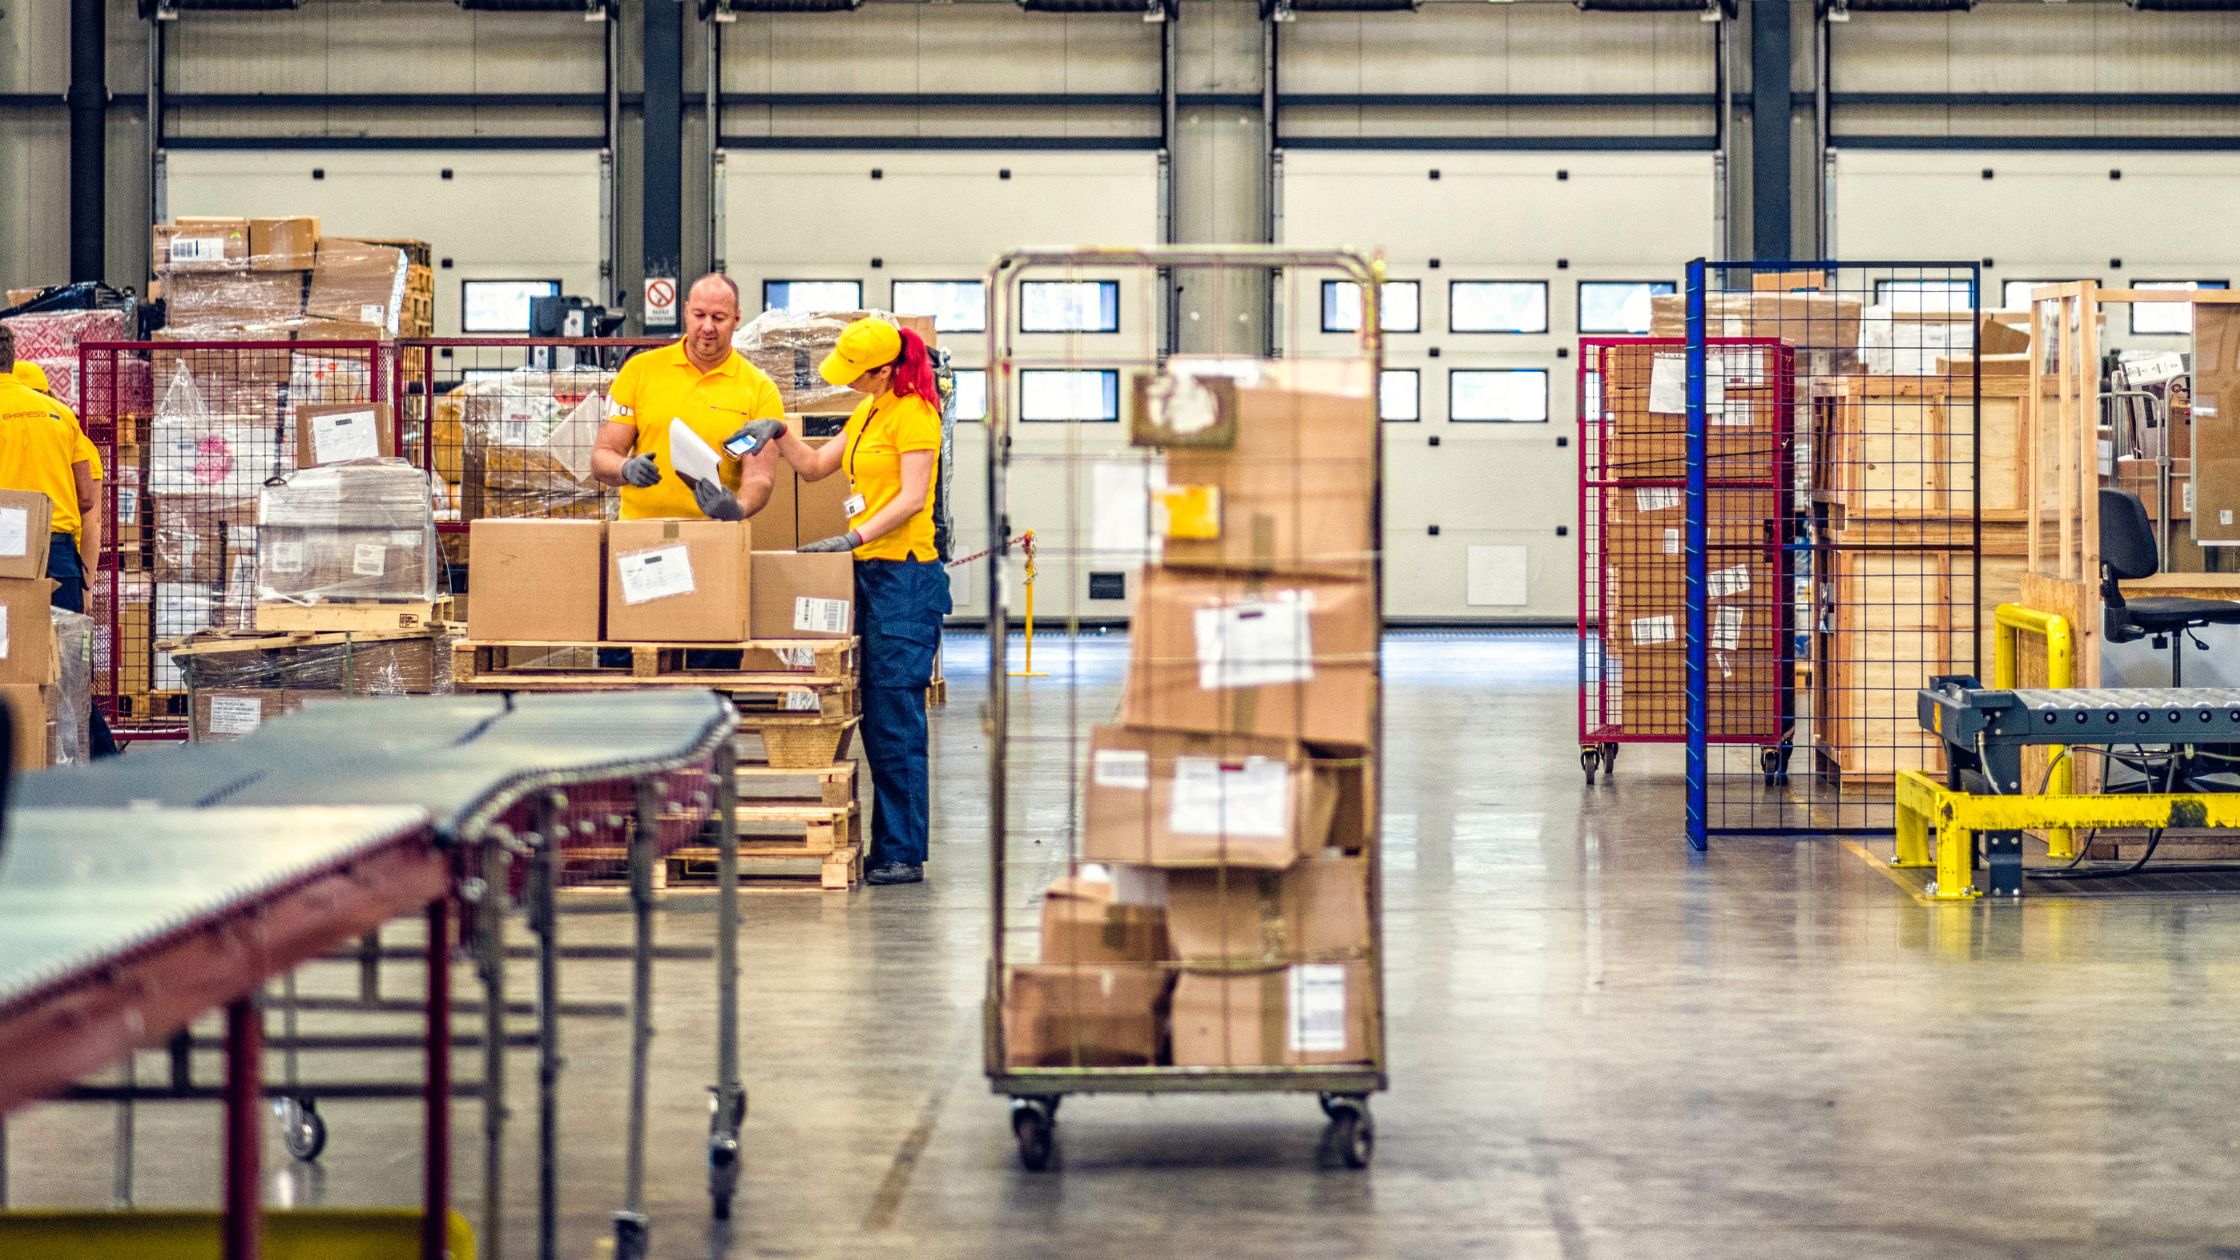 employees working together at warehouse